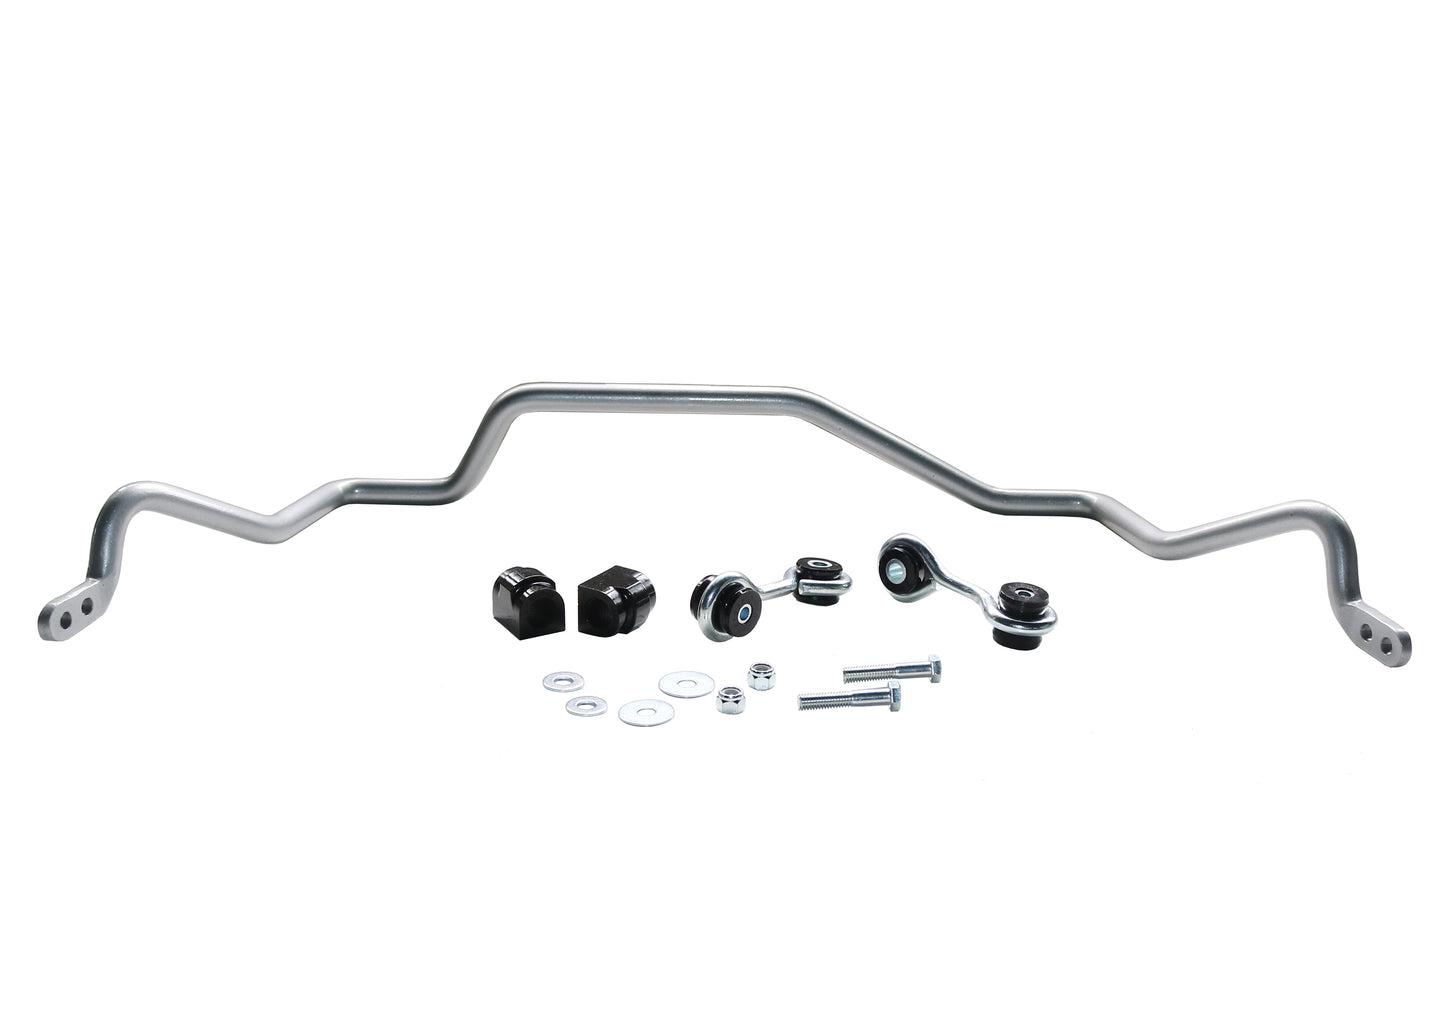 Whiteline Rear Anti Roll Bar 20mm 2-Point Adjustable for BMW 3 Series E46 (97-06)